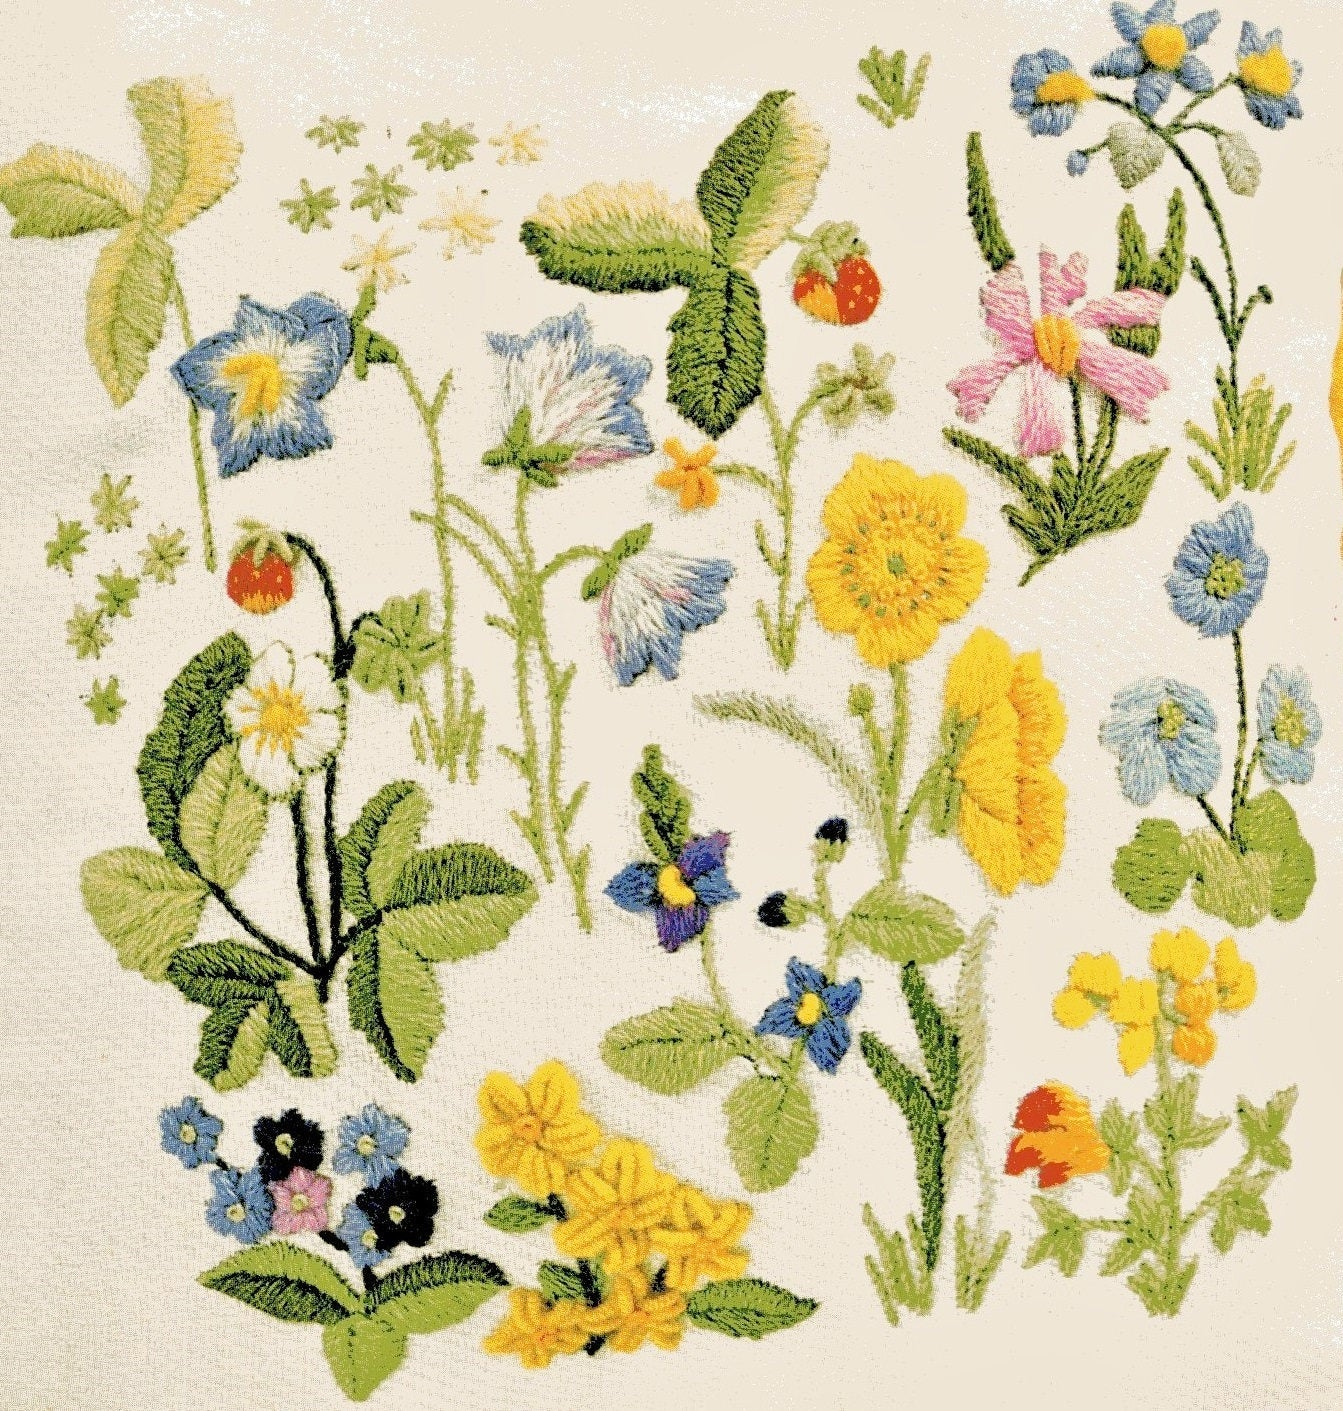 Crewel Embroidery Patterns Pdf Vintage Crewel Embroidery Pattern Field Flowers Woodland Wildflowers Foliage Berries Blossoms Needlepoint Instant Digital Download